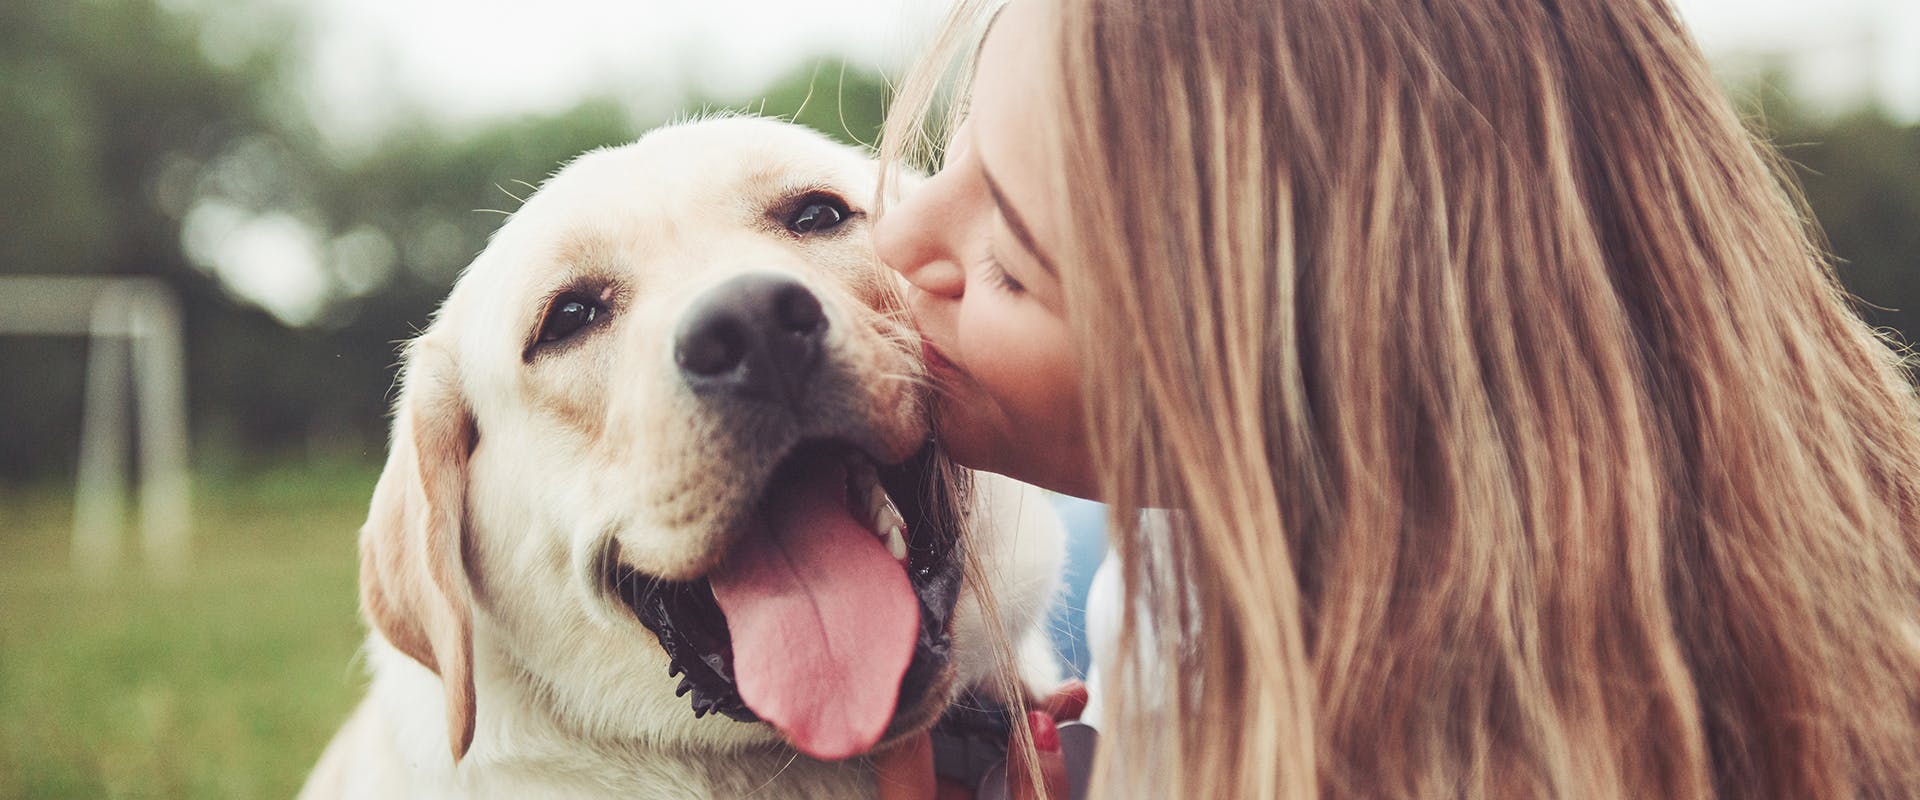 How to show your dog you love them: a woman kissing a happy looking dog